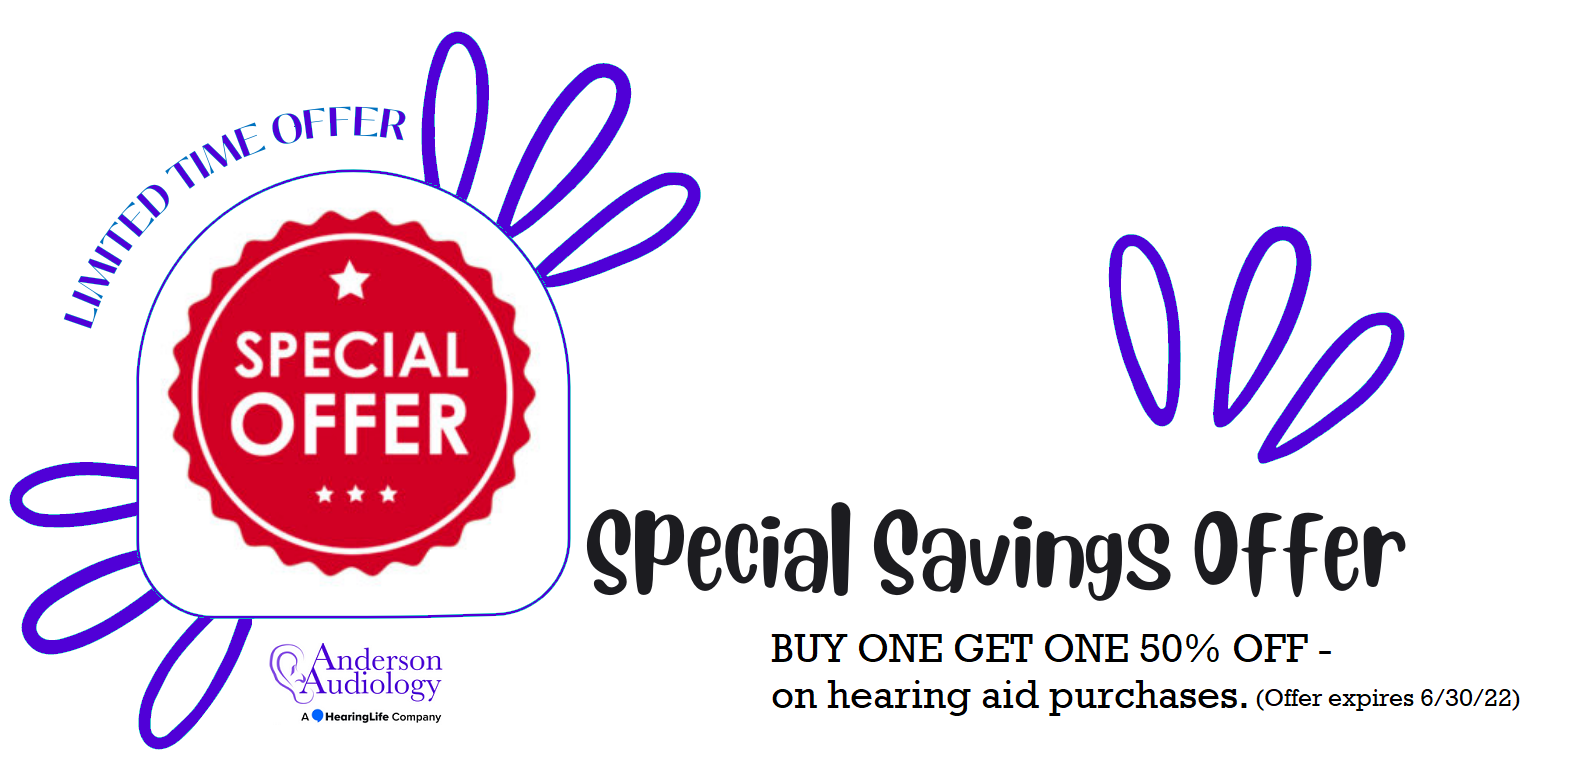 Hearing Aids Discount Offer